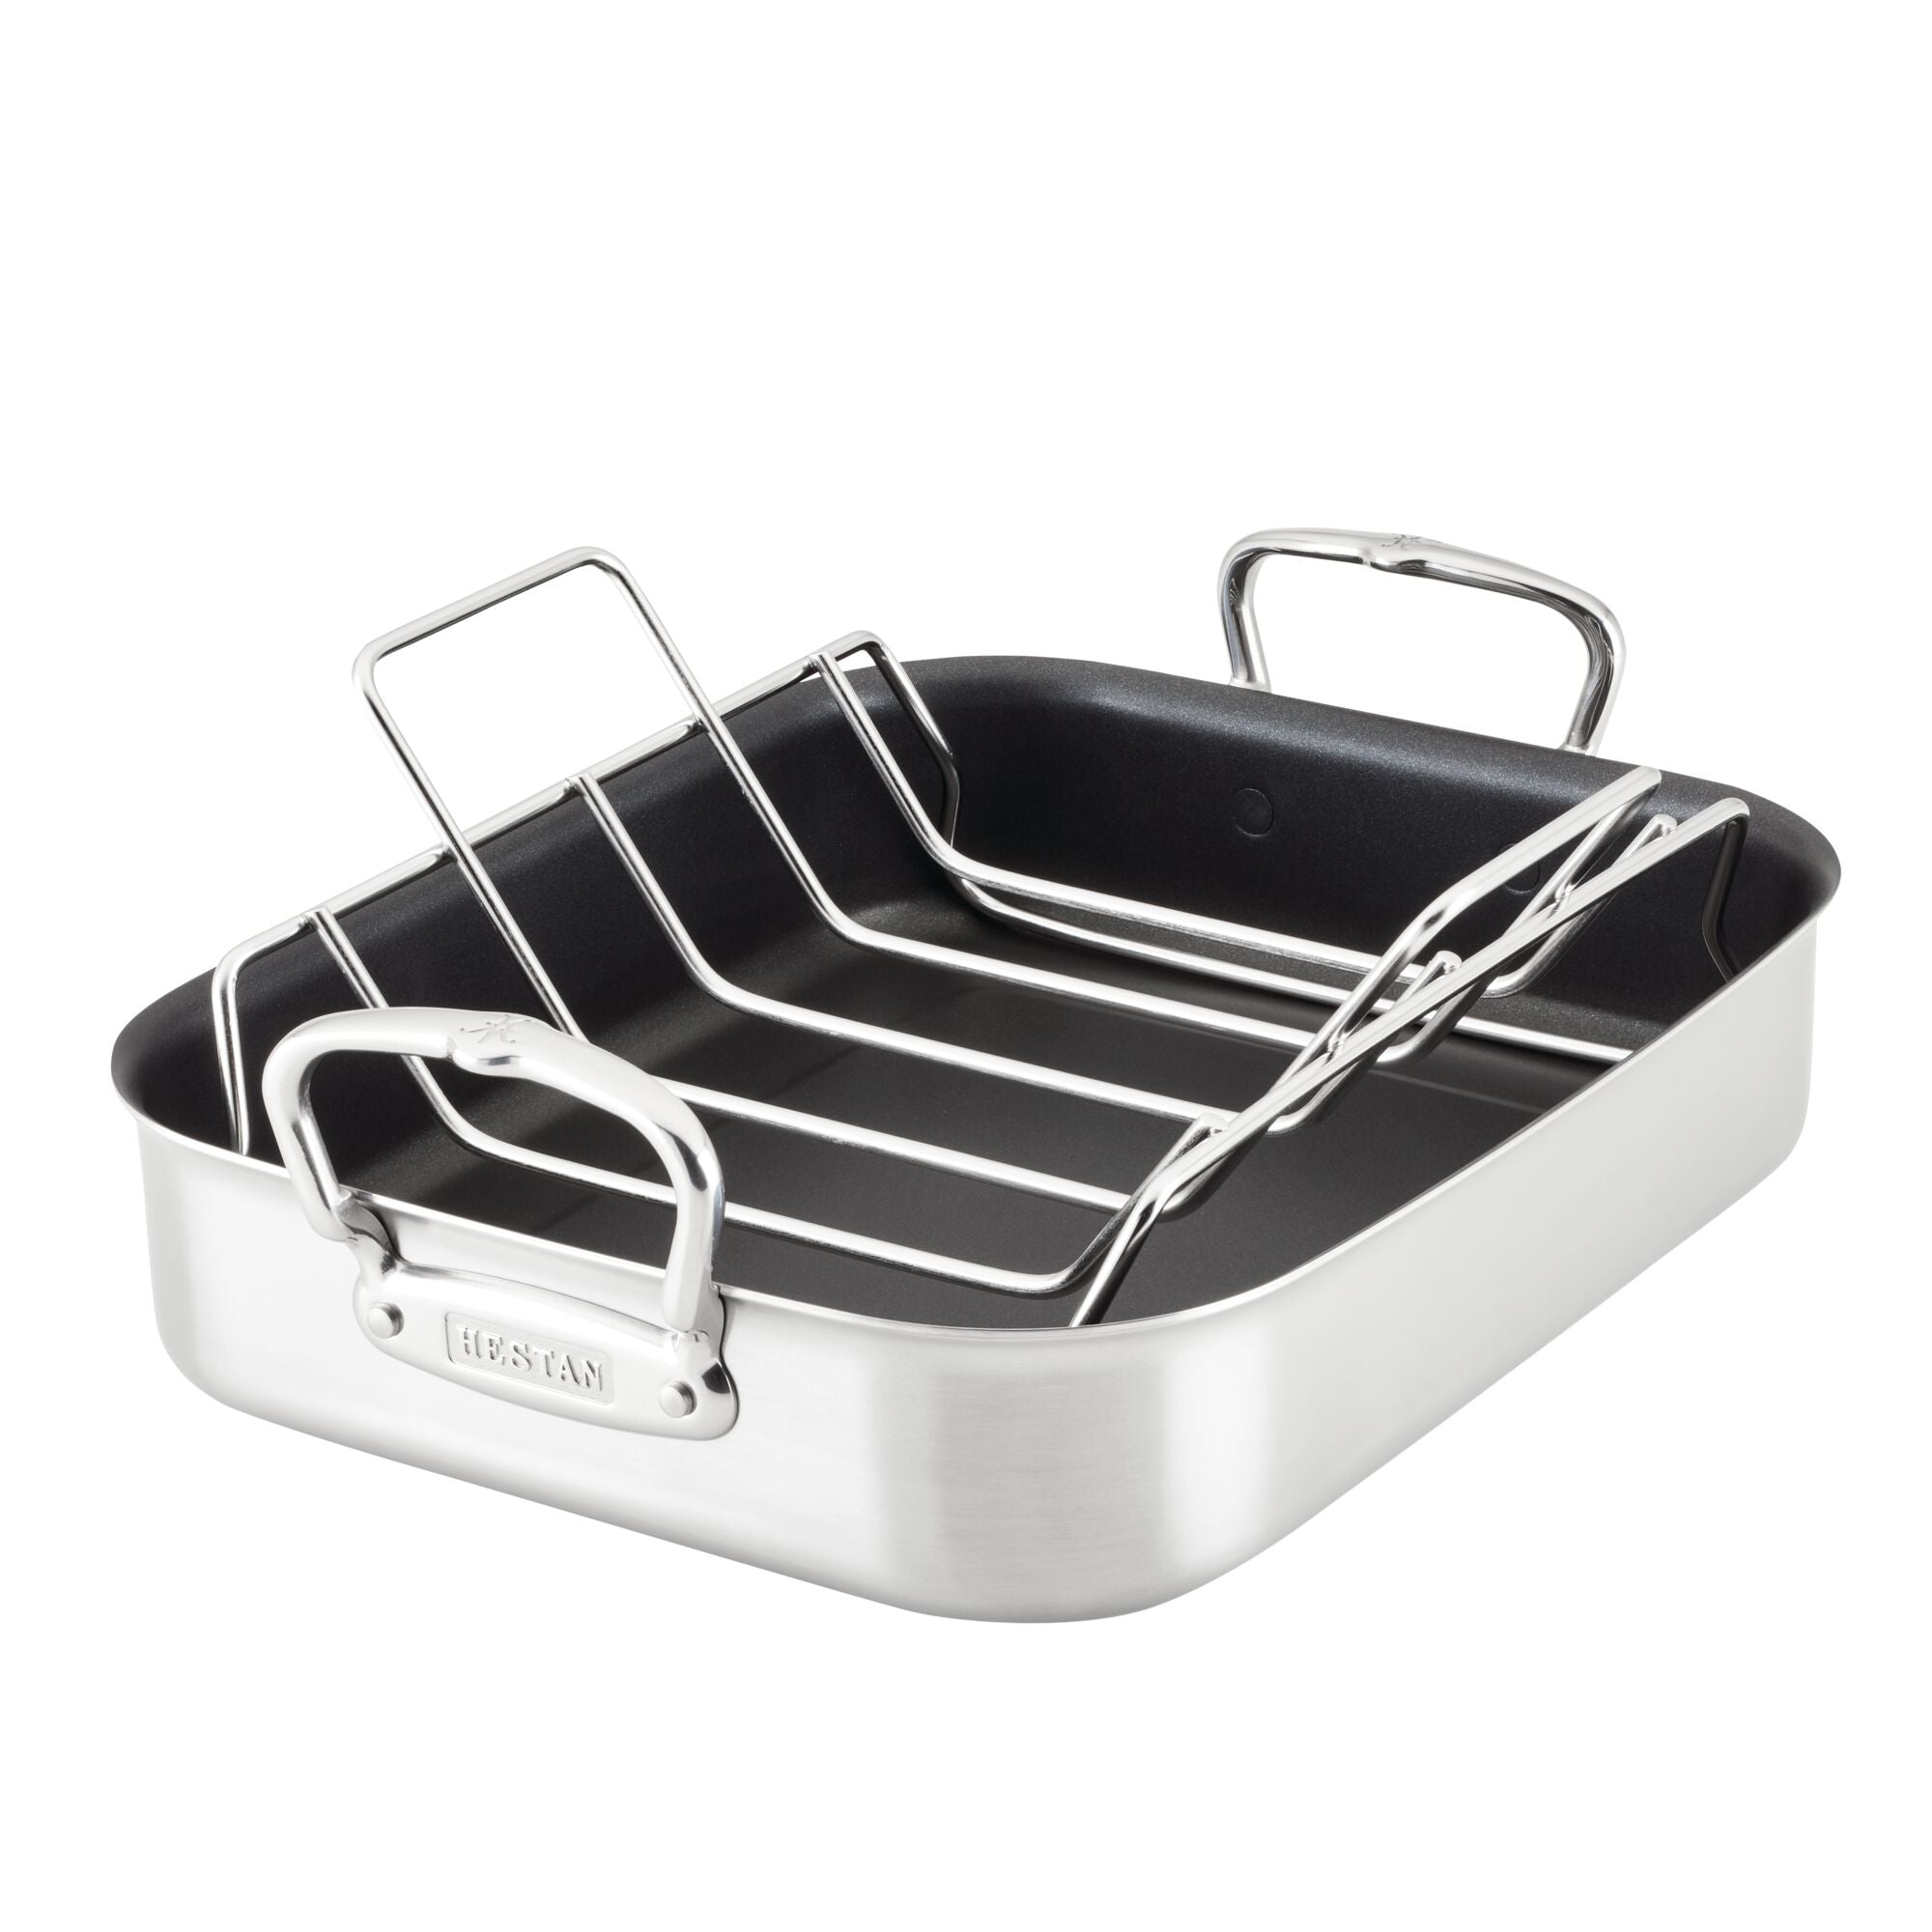 3 Piece Roaster Set, 3 Qt. Stainless Steel Roast Pan with Lid and Rack